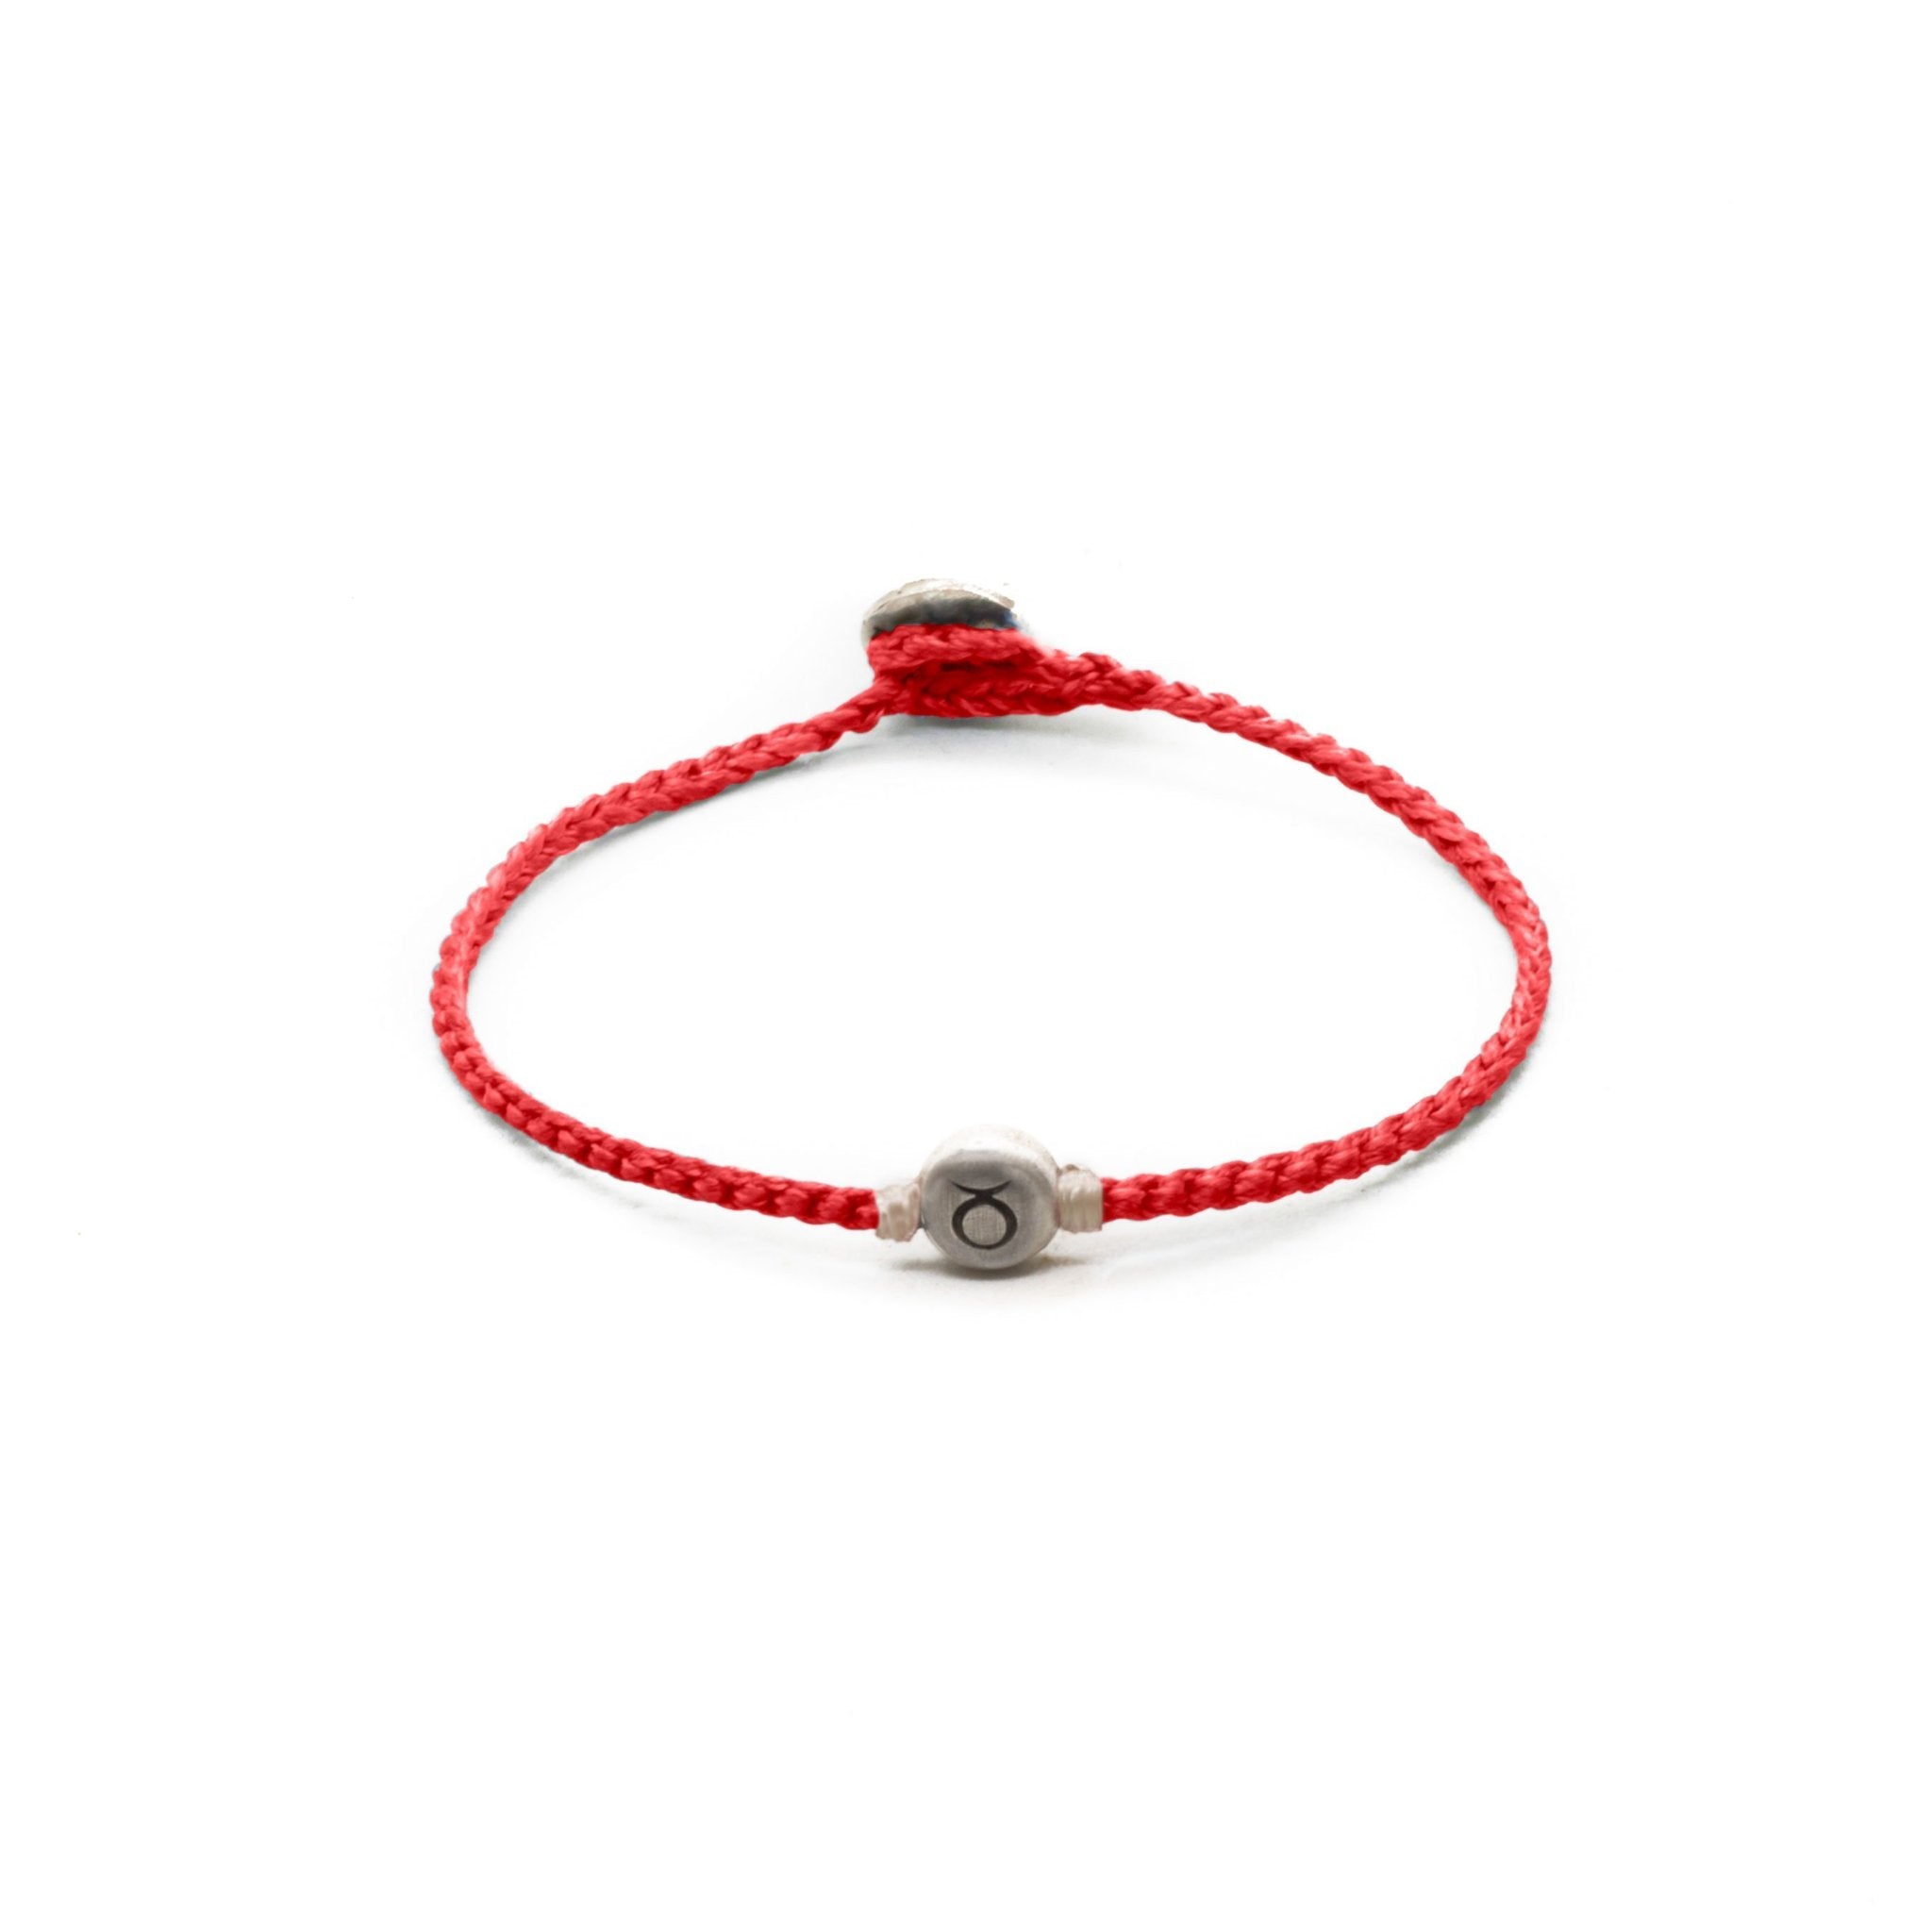 Silver Taurus zodiac sign bracelet with red hand braided chain.